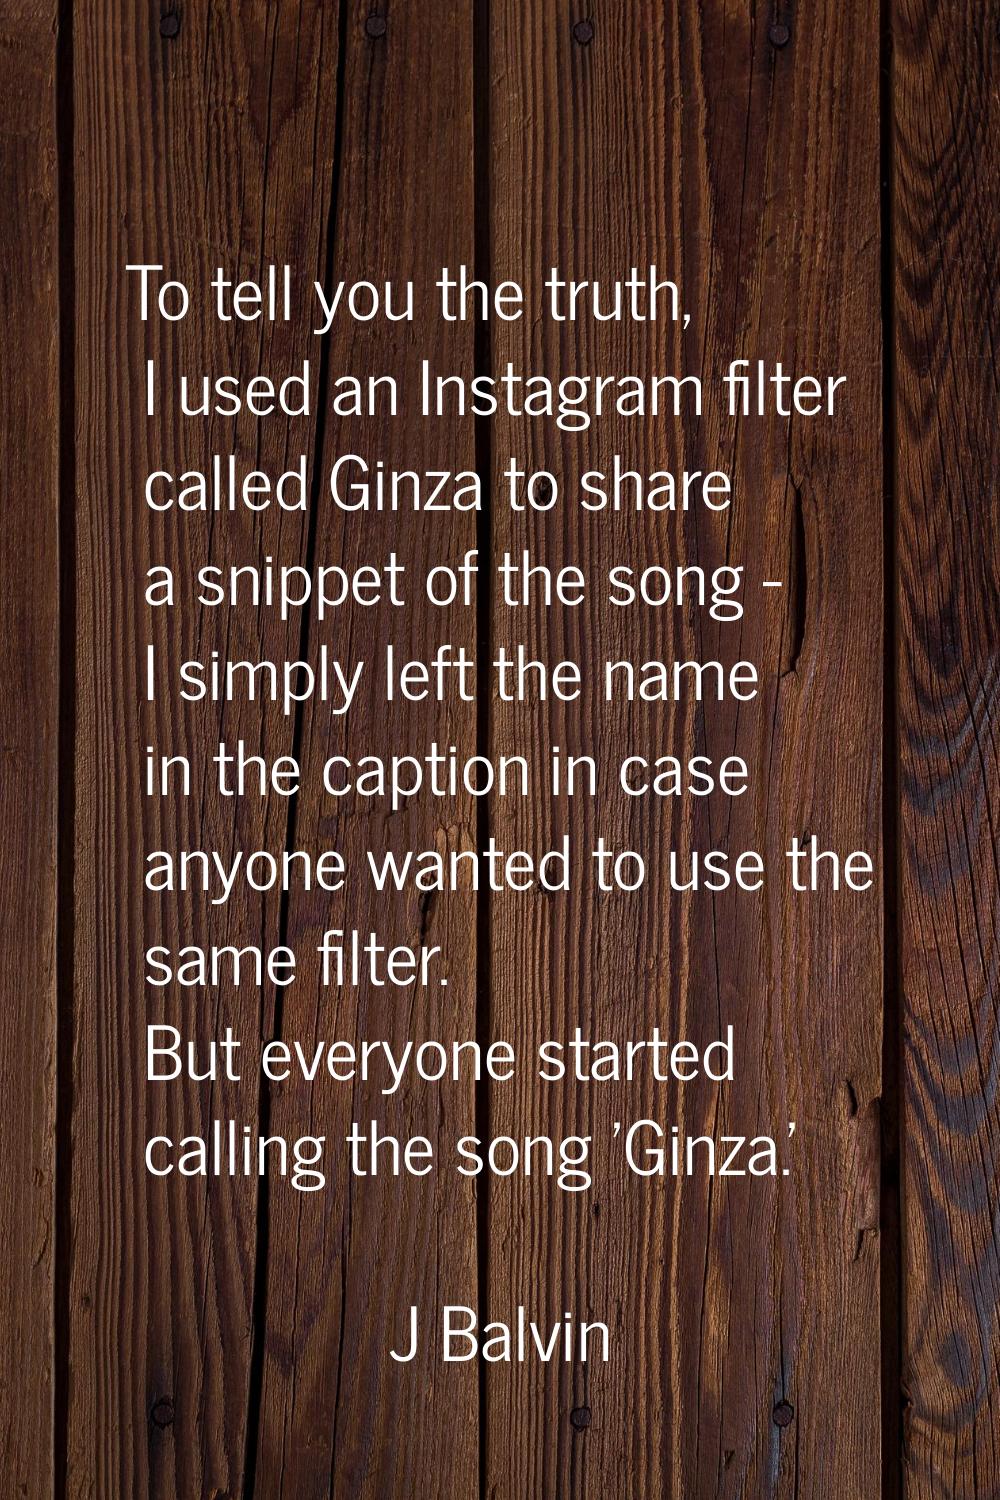 To tell you the truth, I used an Instagram filter called Ginza to share a snippet of the song - I s